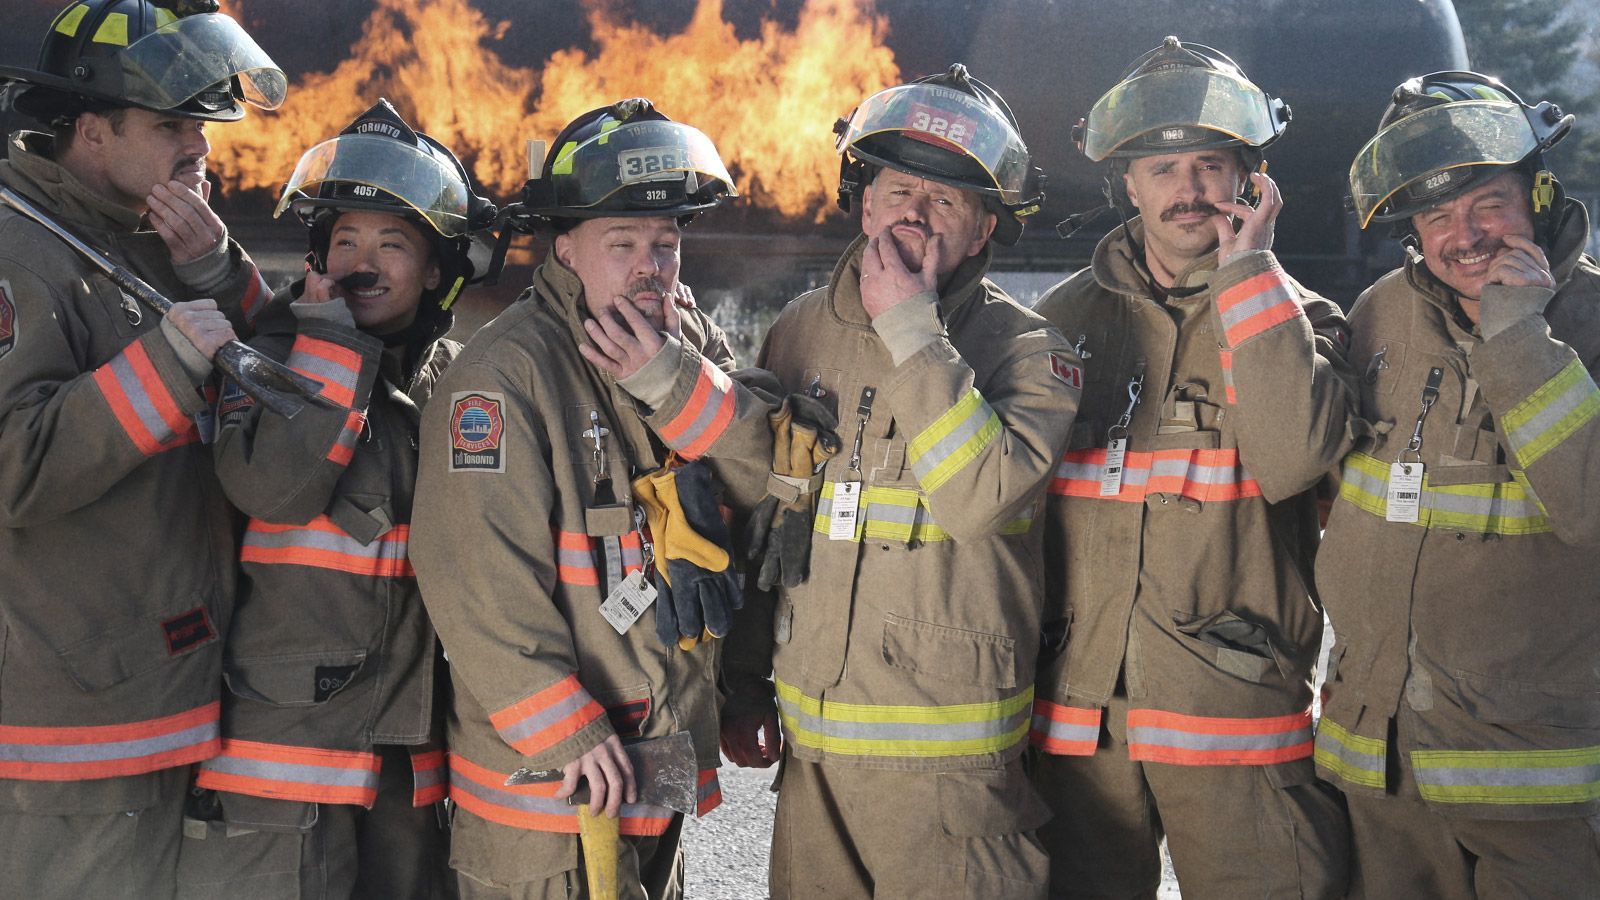 Fire fighters in uniform standing looking to camera while admiring their moustaches.